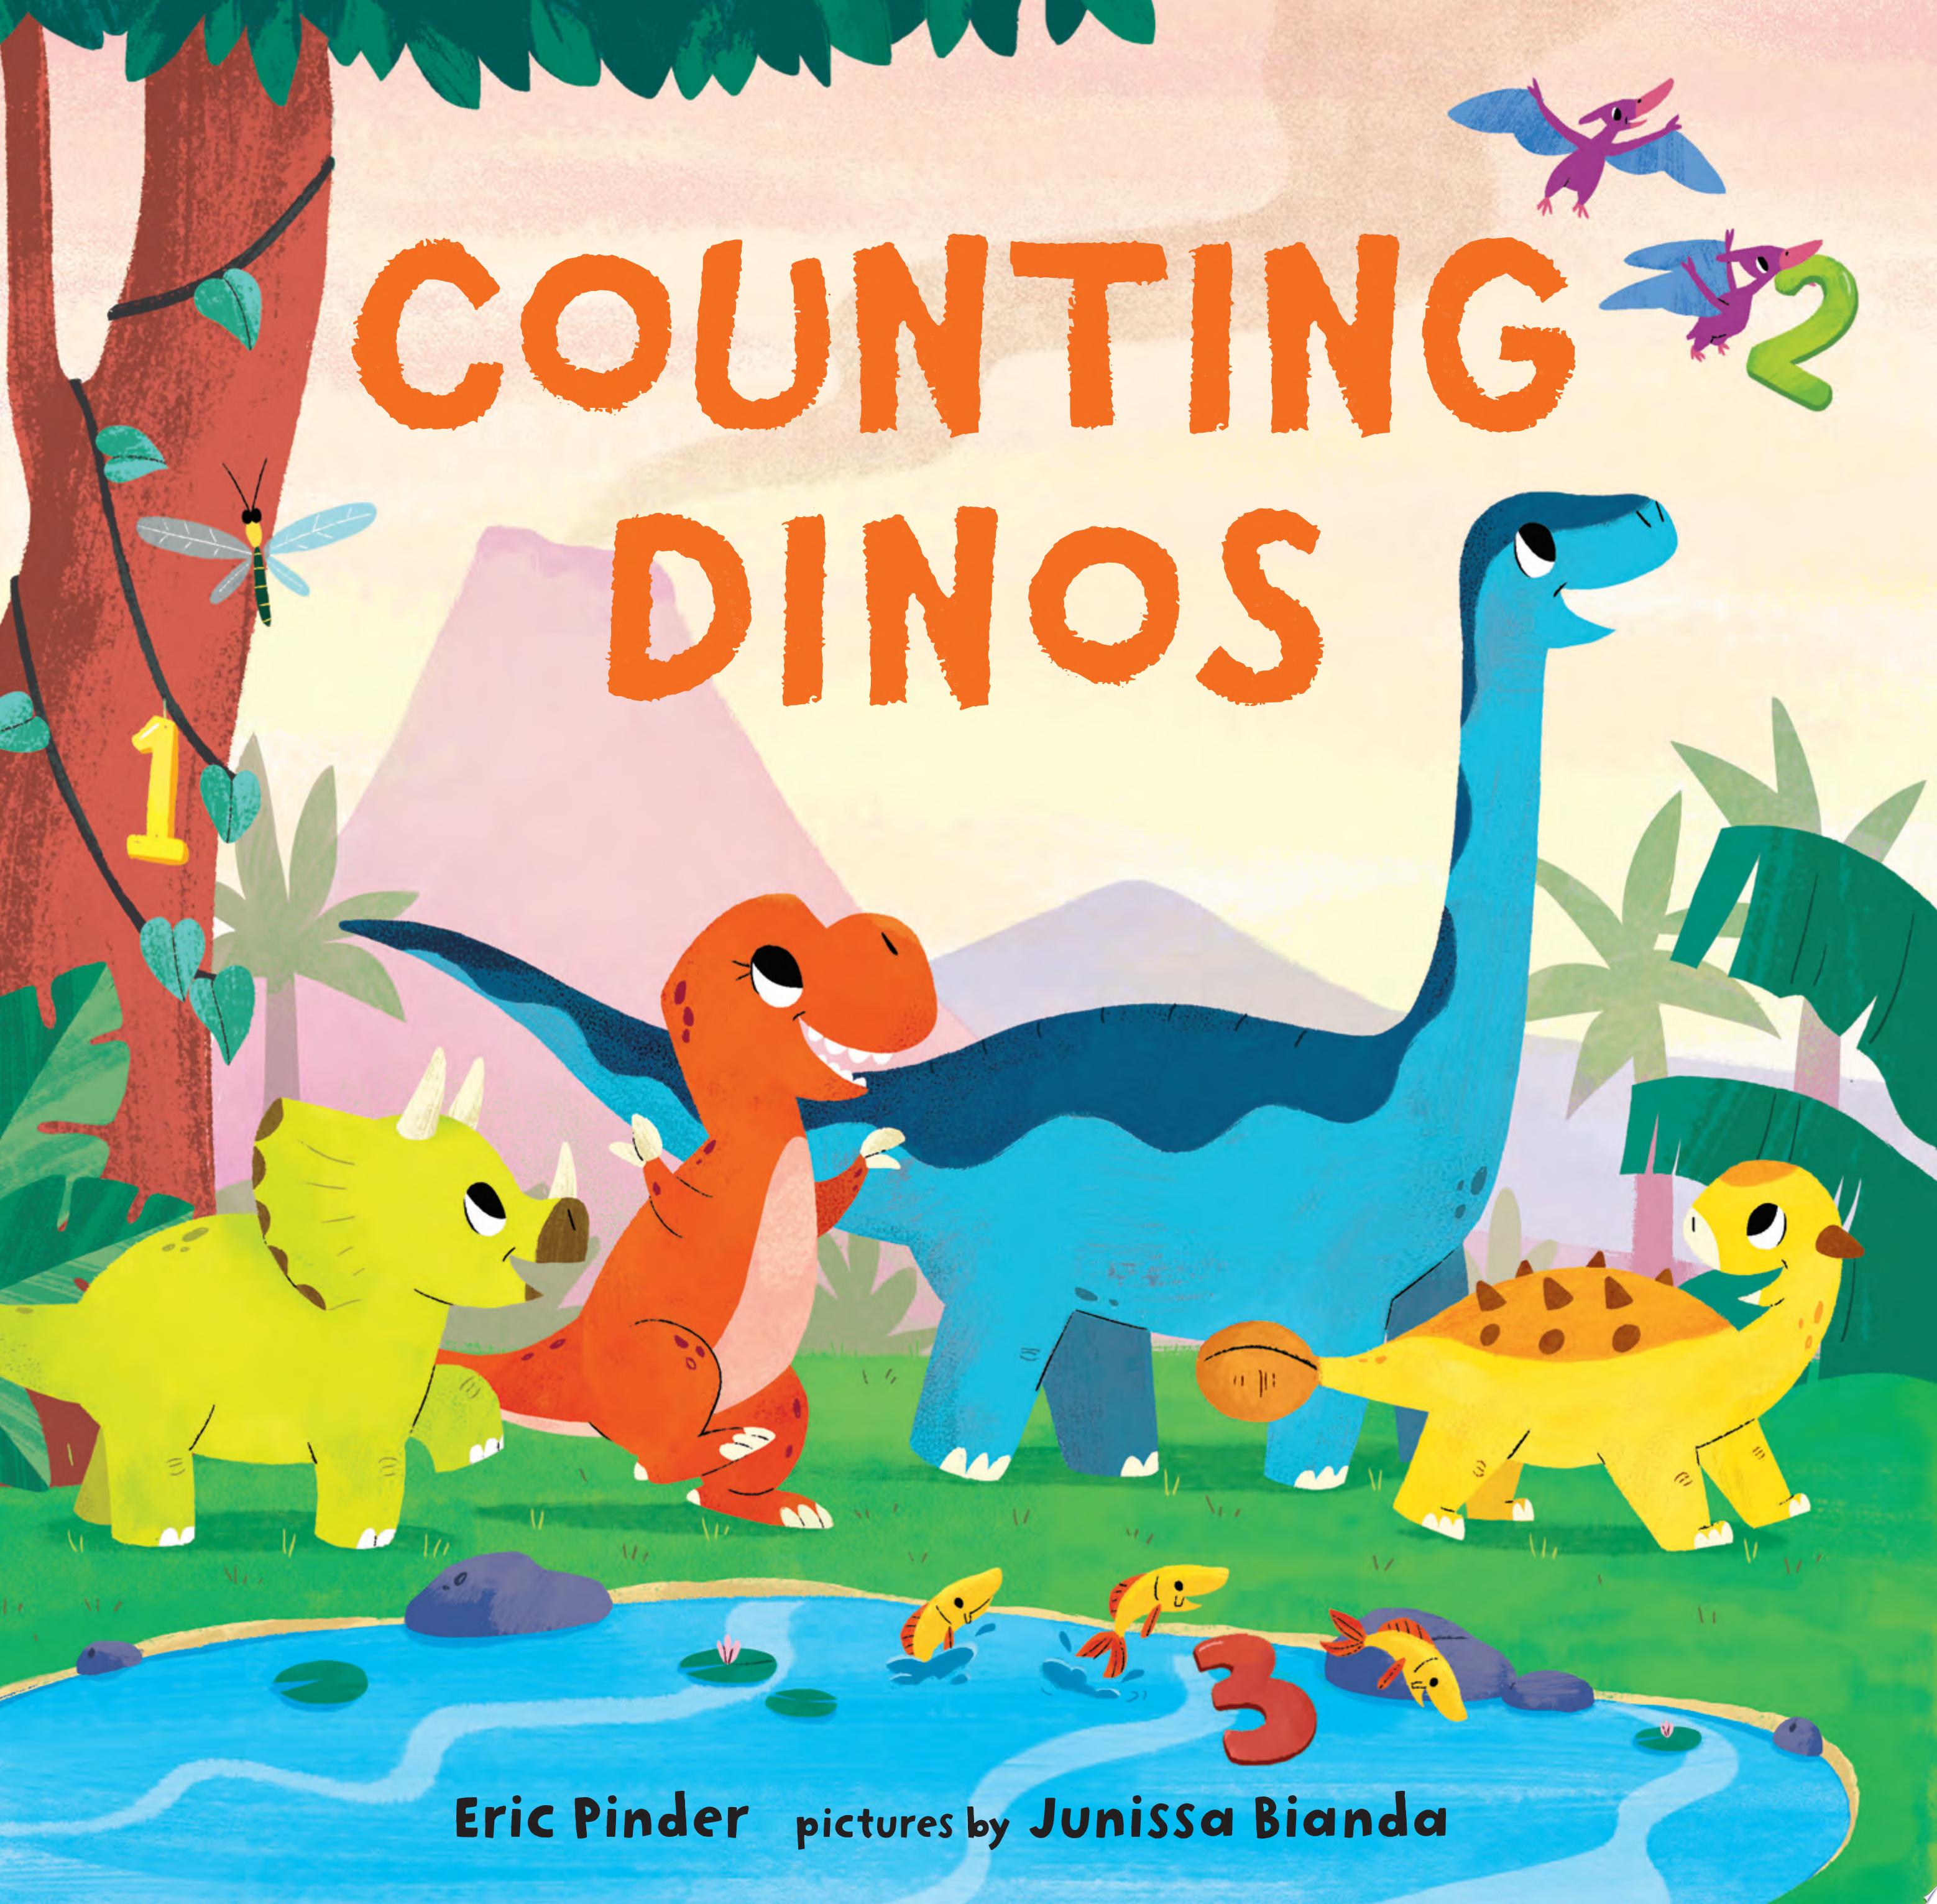 Image for "Counting Dinos"